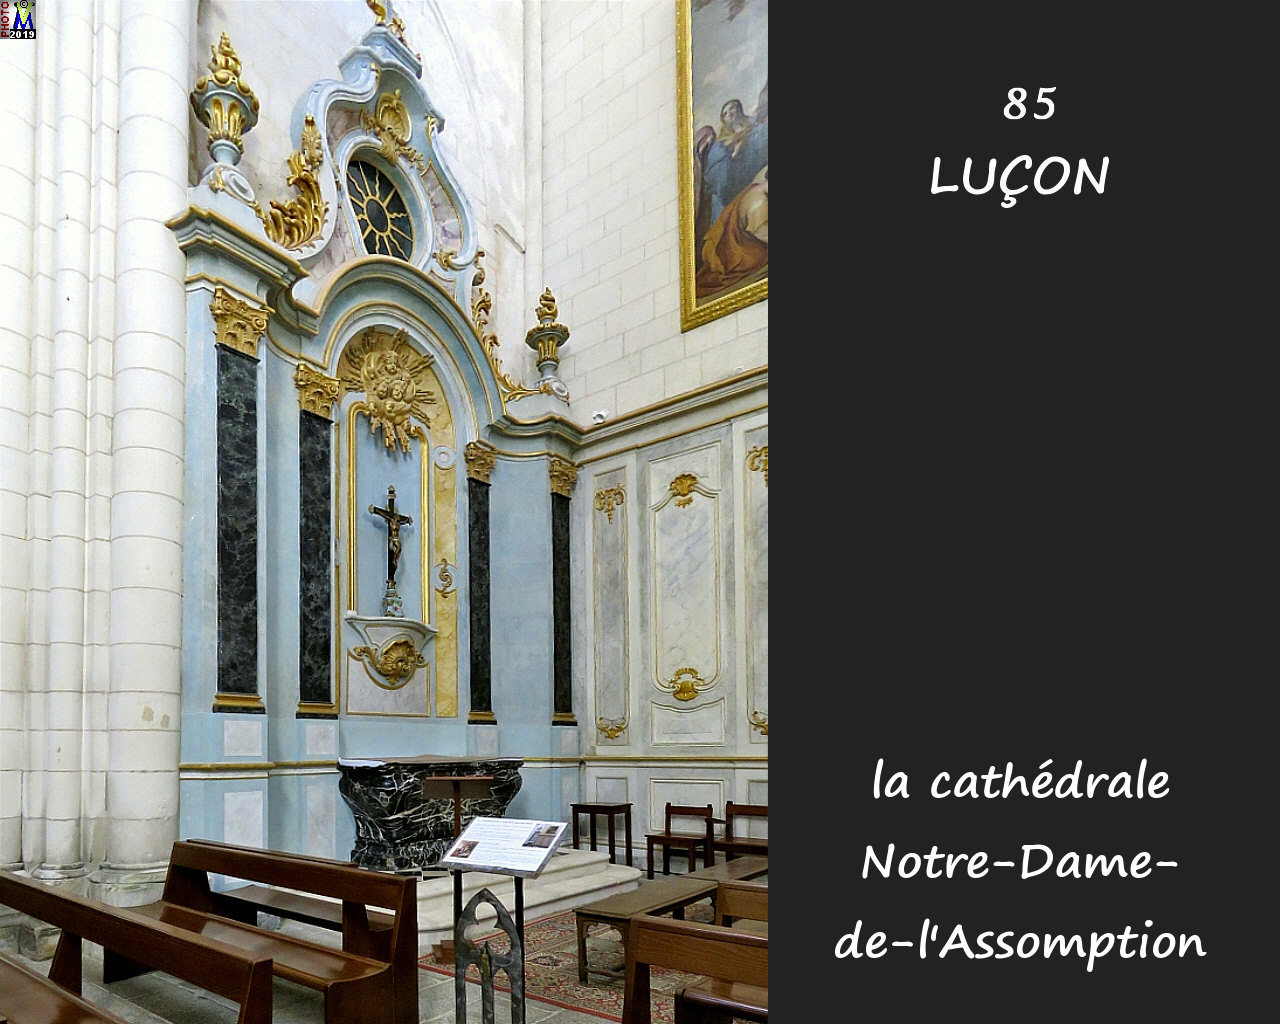 85LUCON_cathedrale_262.jpg